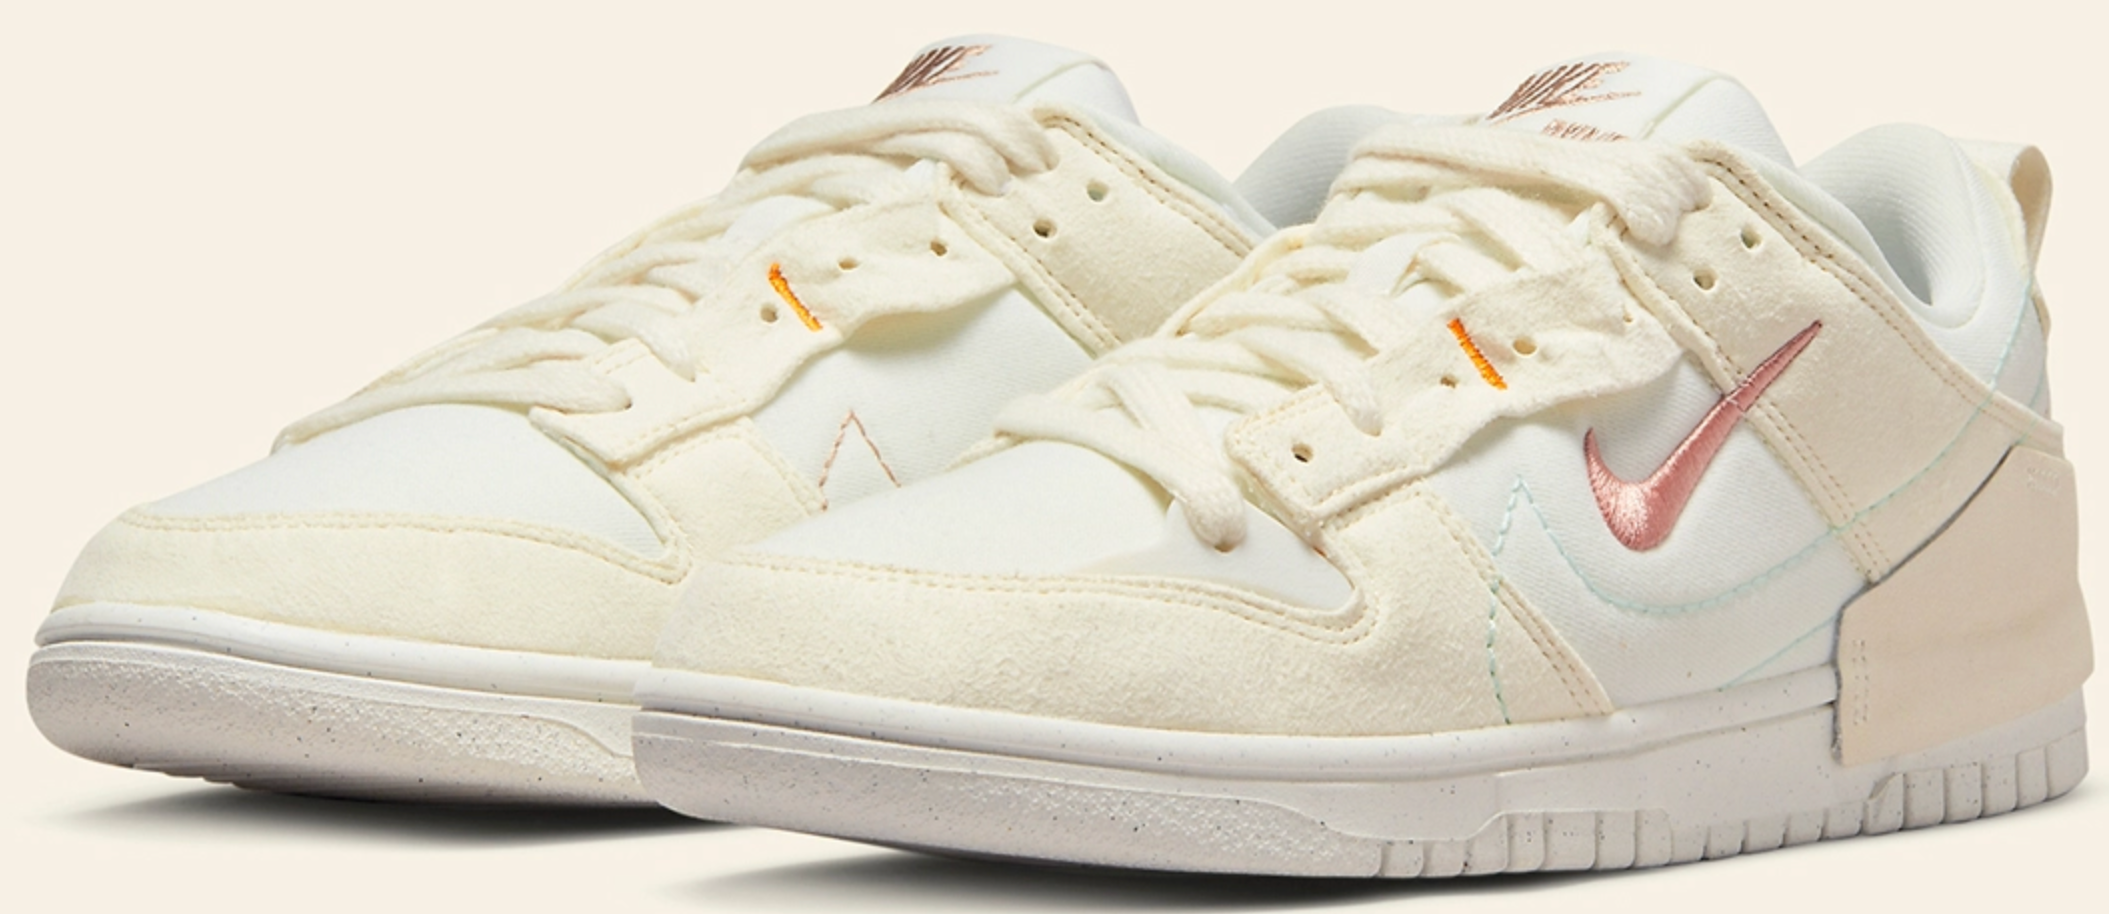 NIKE DUNK LOW DISRUPT 2 PALE IVORY - The Edit LDN